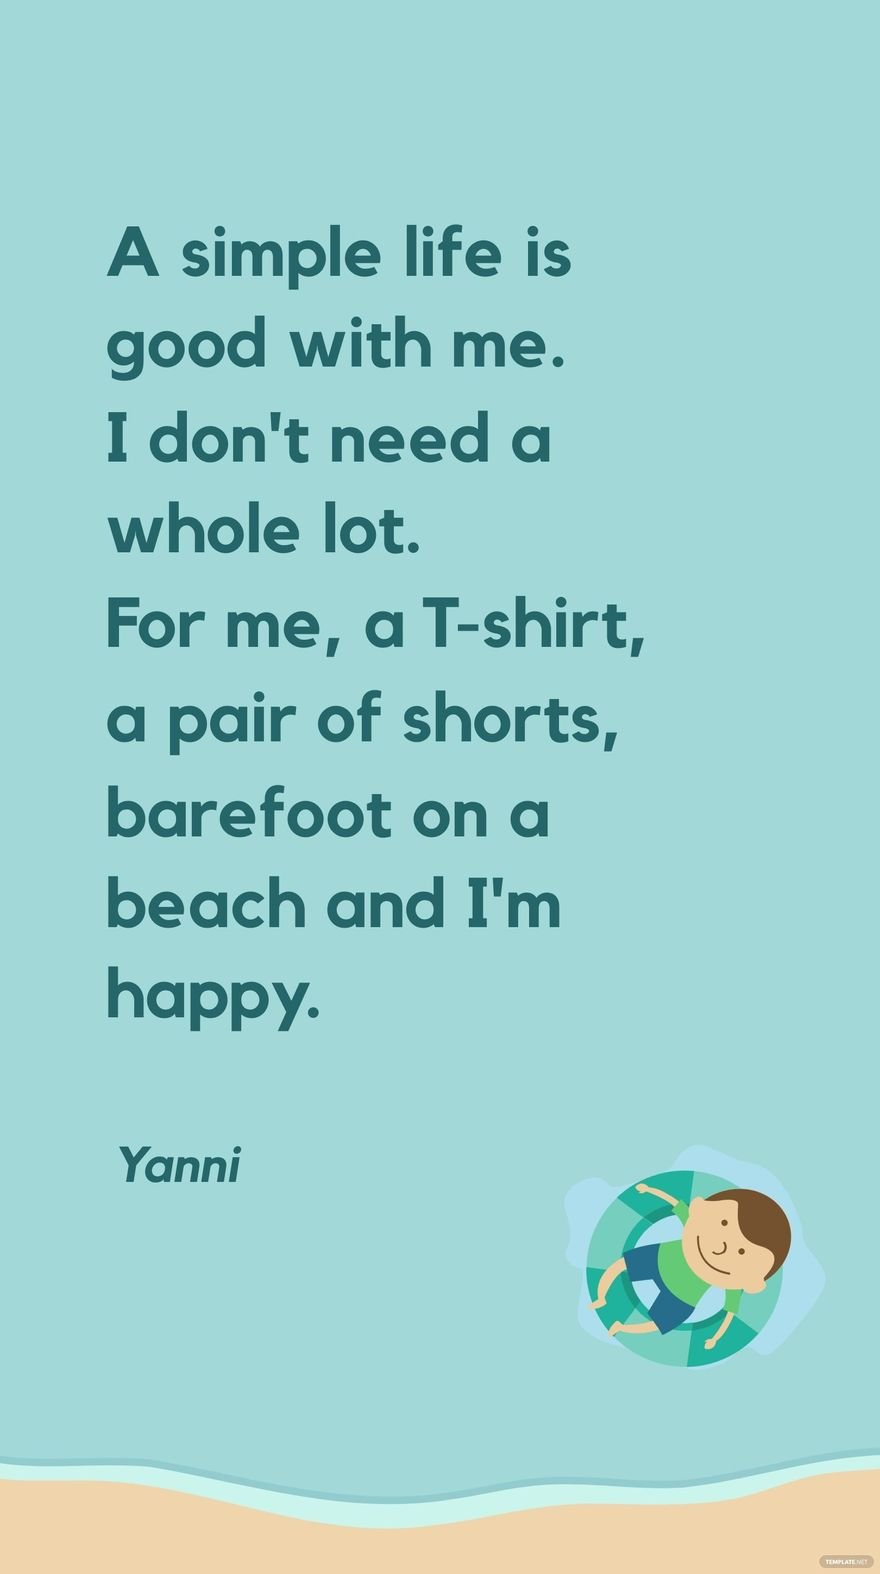 Yanni - A simple life is good with me. I don't need a whole lot. For me, a T-shirt, a pair of shorts, barefoot on a beach and I'm happy. in JPG